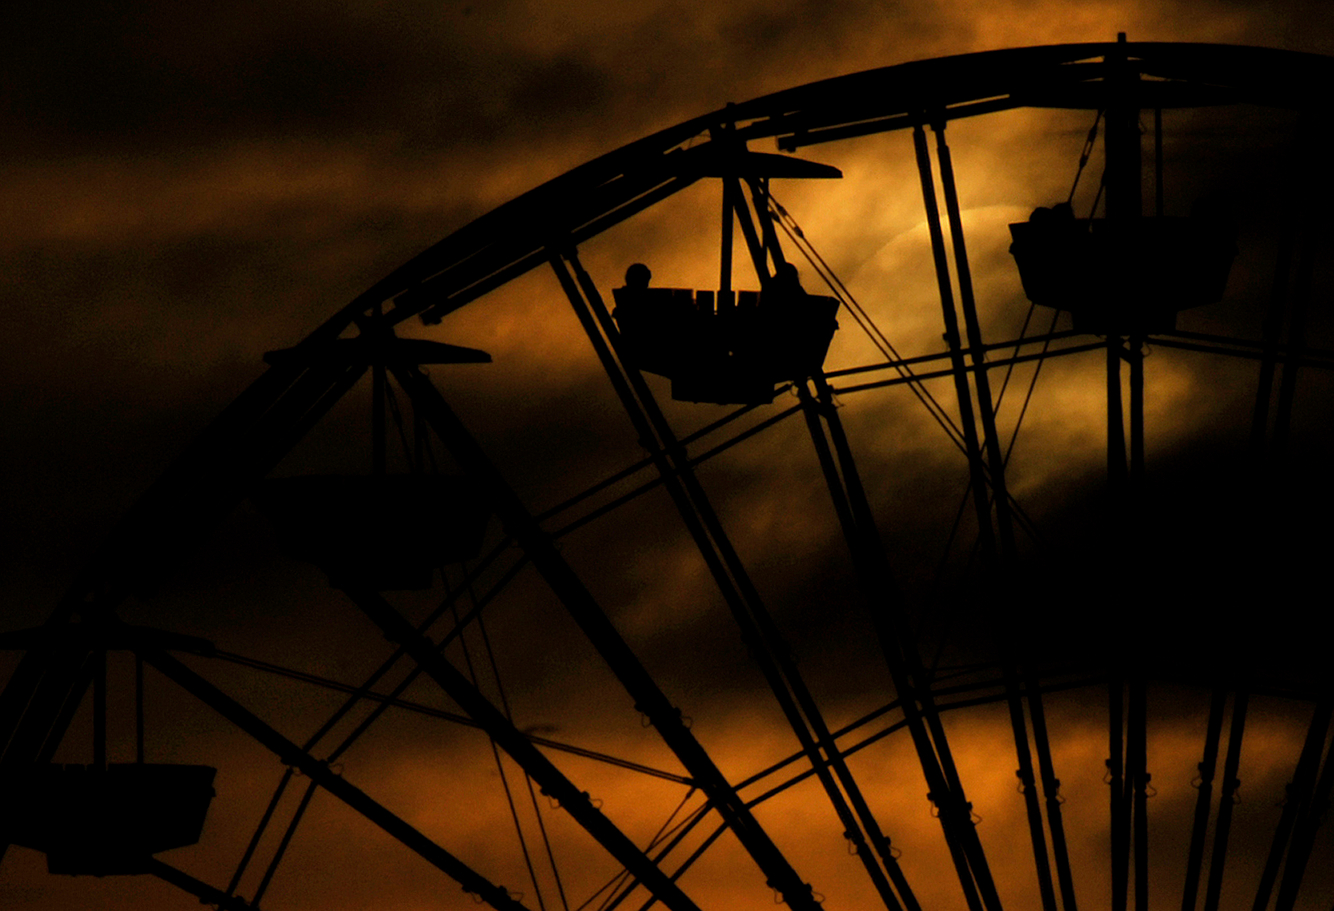 The sun sets behind clouds as people enjoy a Ferris Wheel ride at the Santa Monica Pier